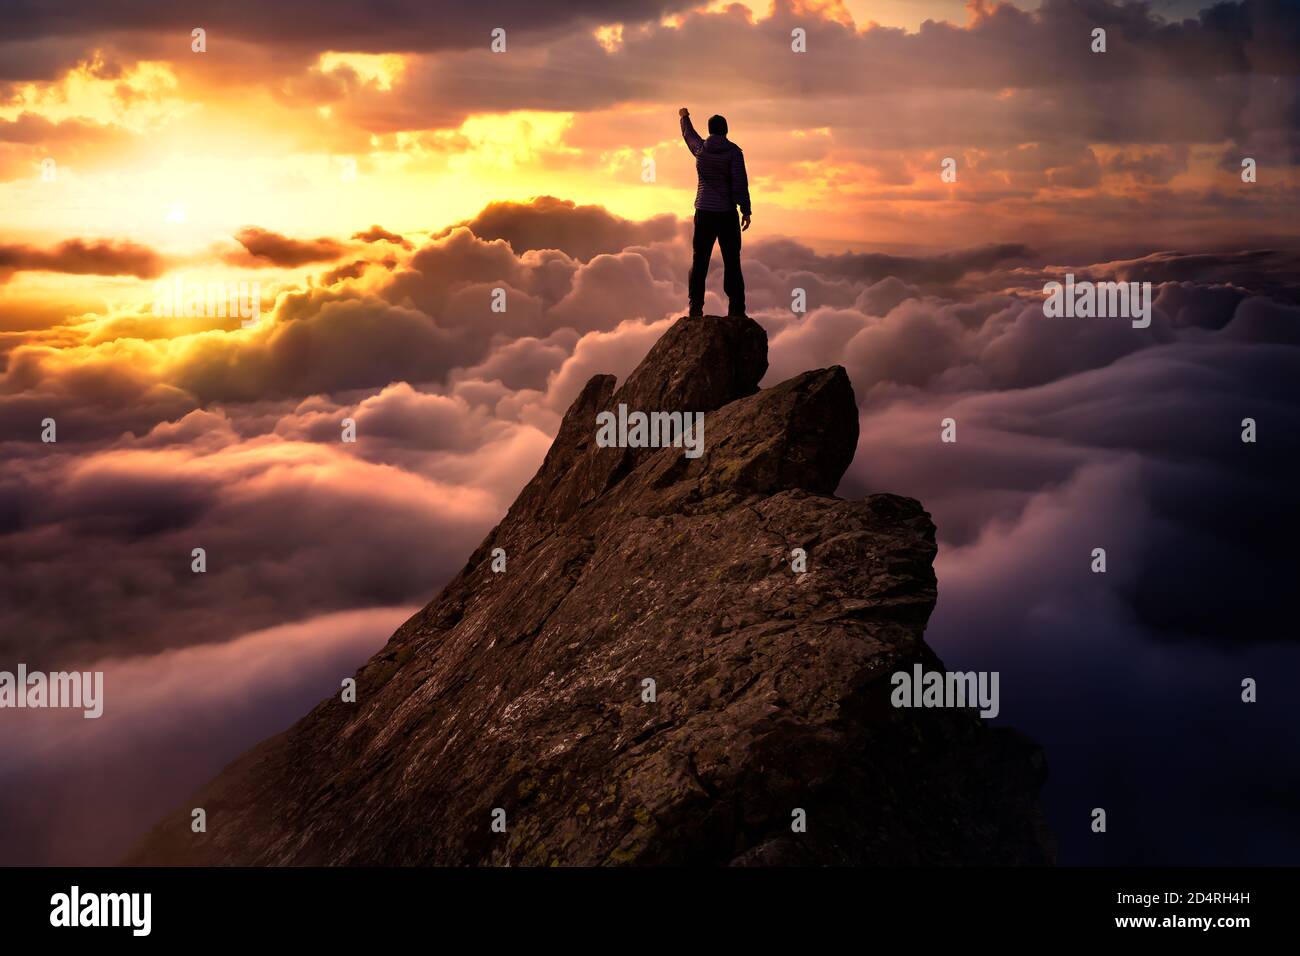 Fantasy Adventure Composite with a Man on top of a Mountain Cliff Stock  Photo - Alamy